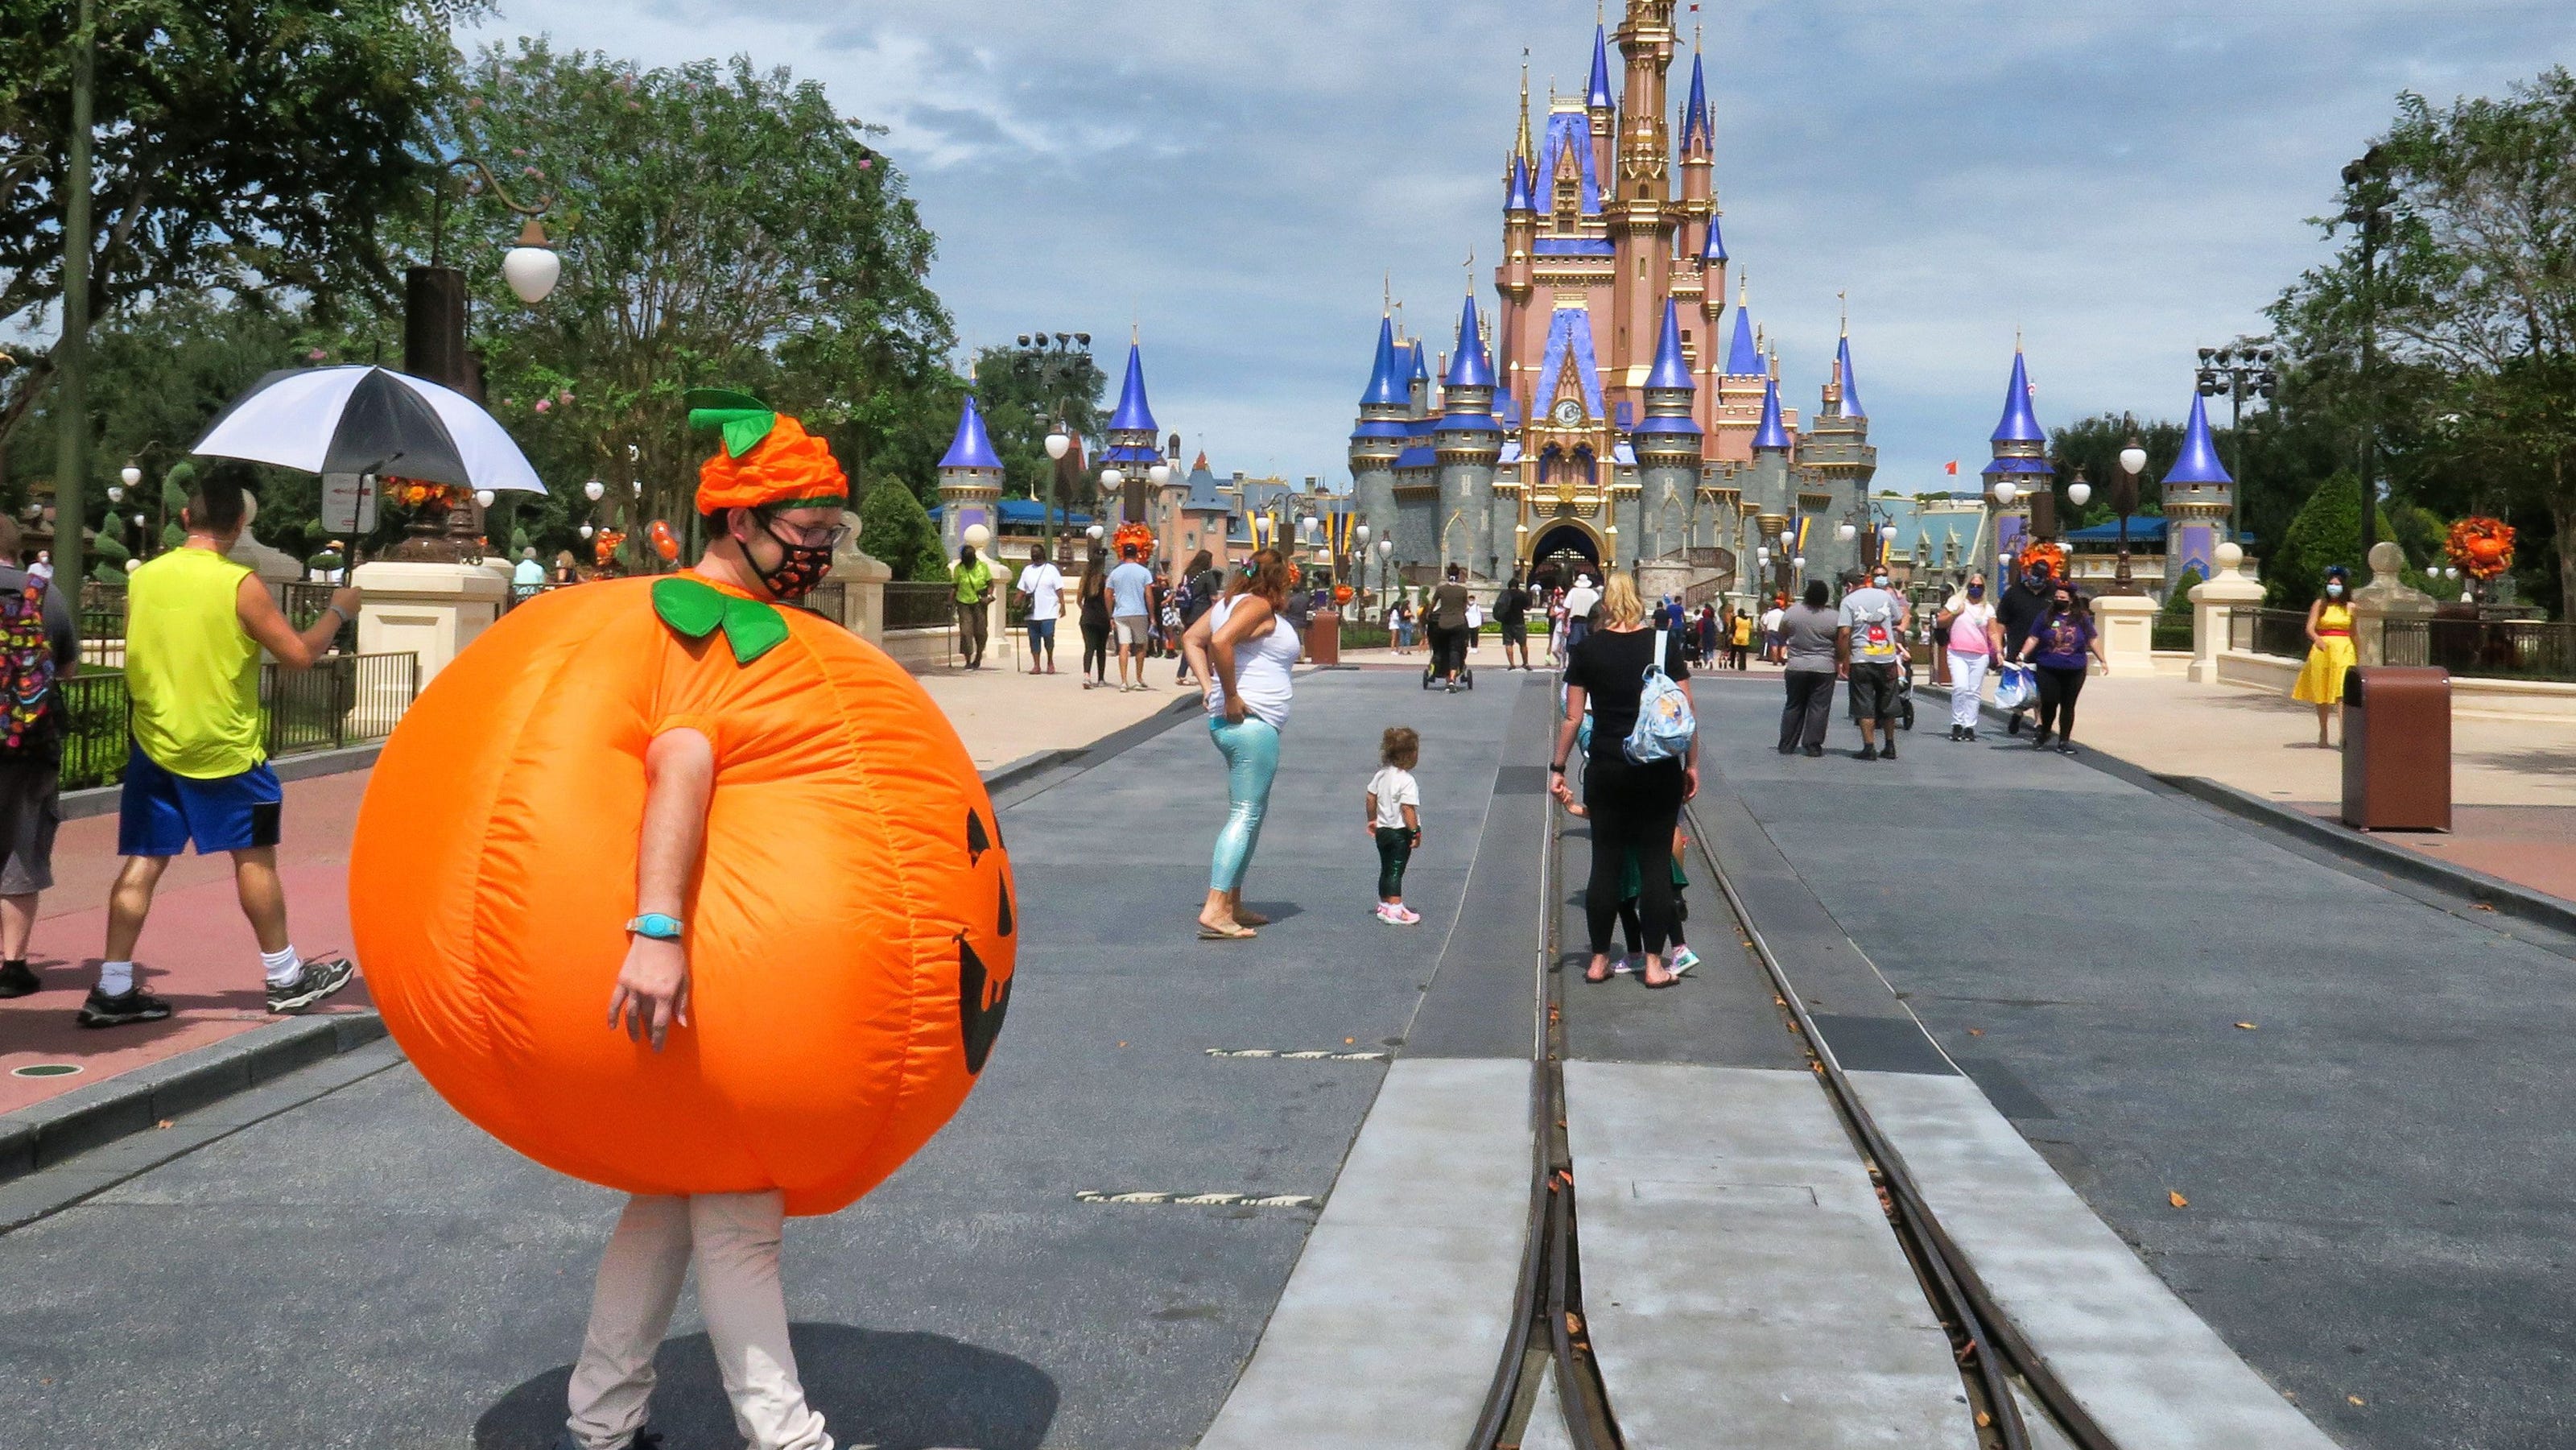 Walt Disney World crowds are historically low, but ride wait times grow